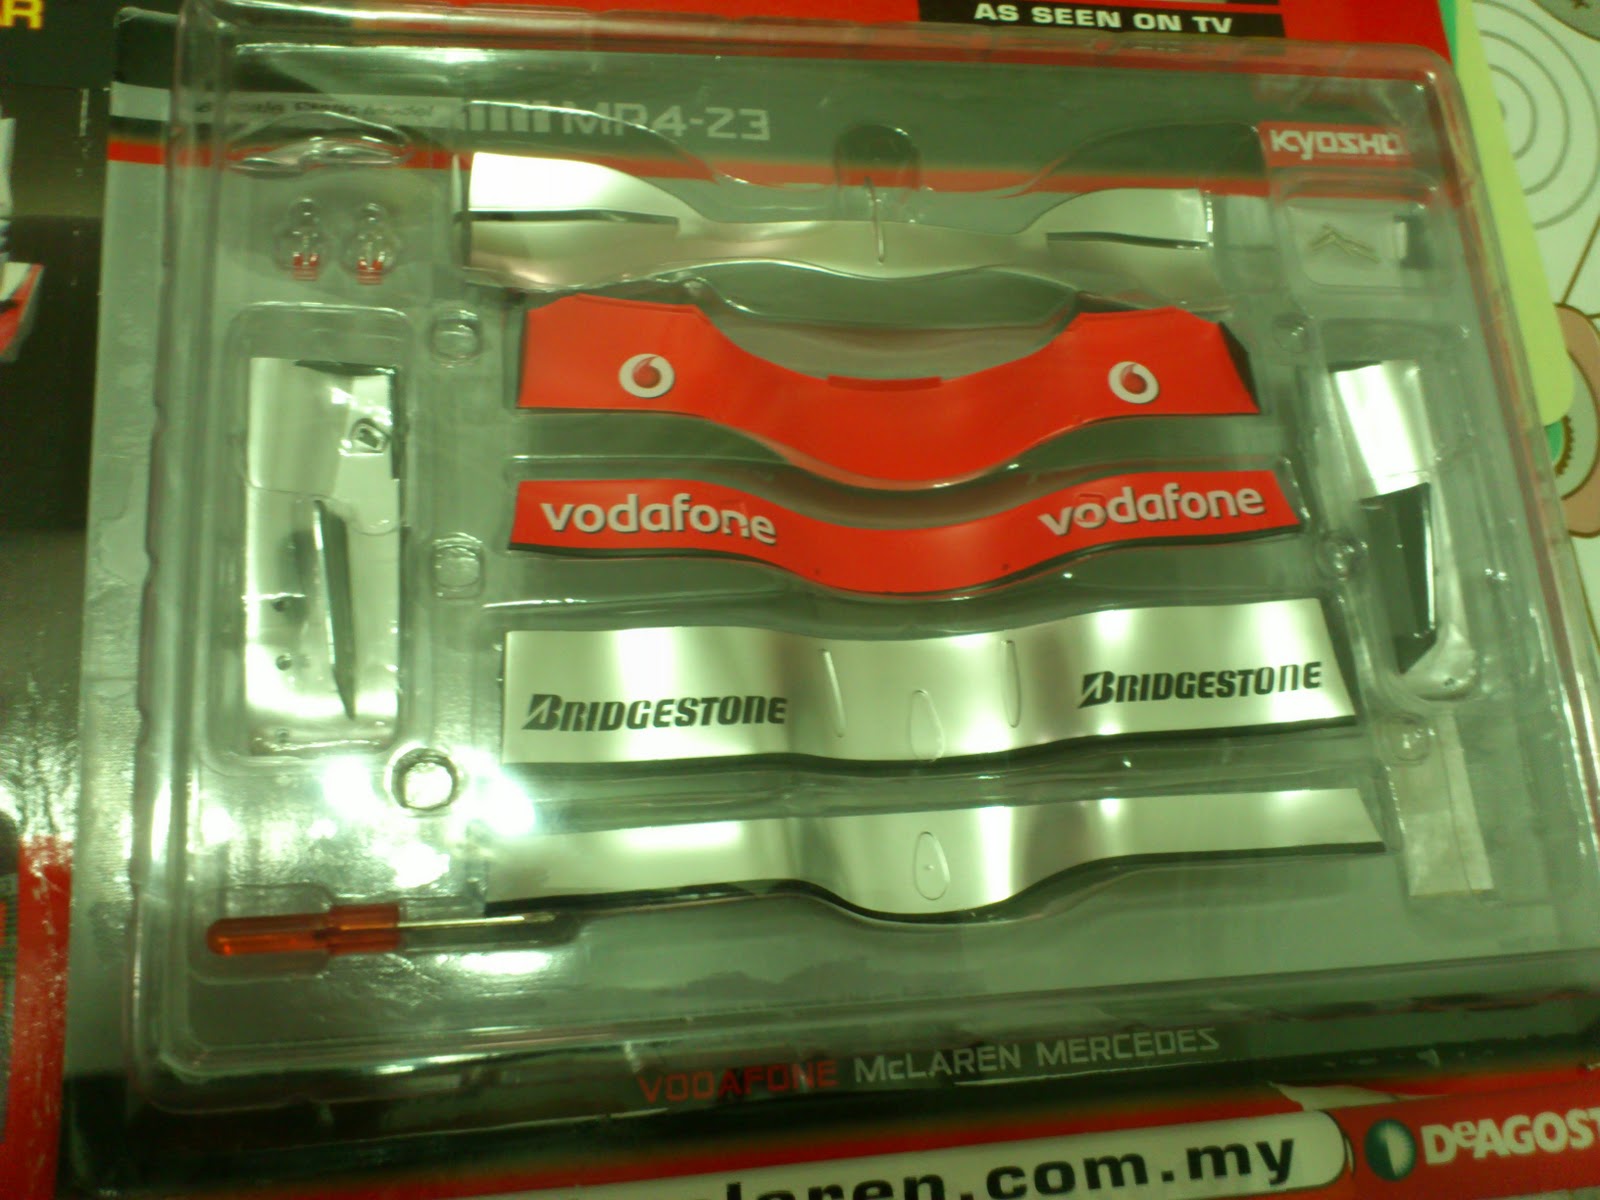 Build your own McLaren F1 car - from RM9.90